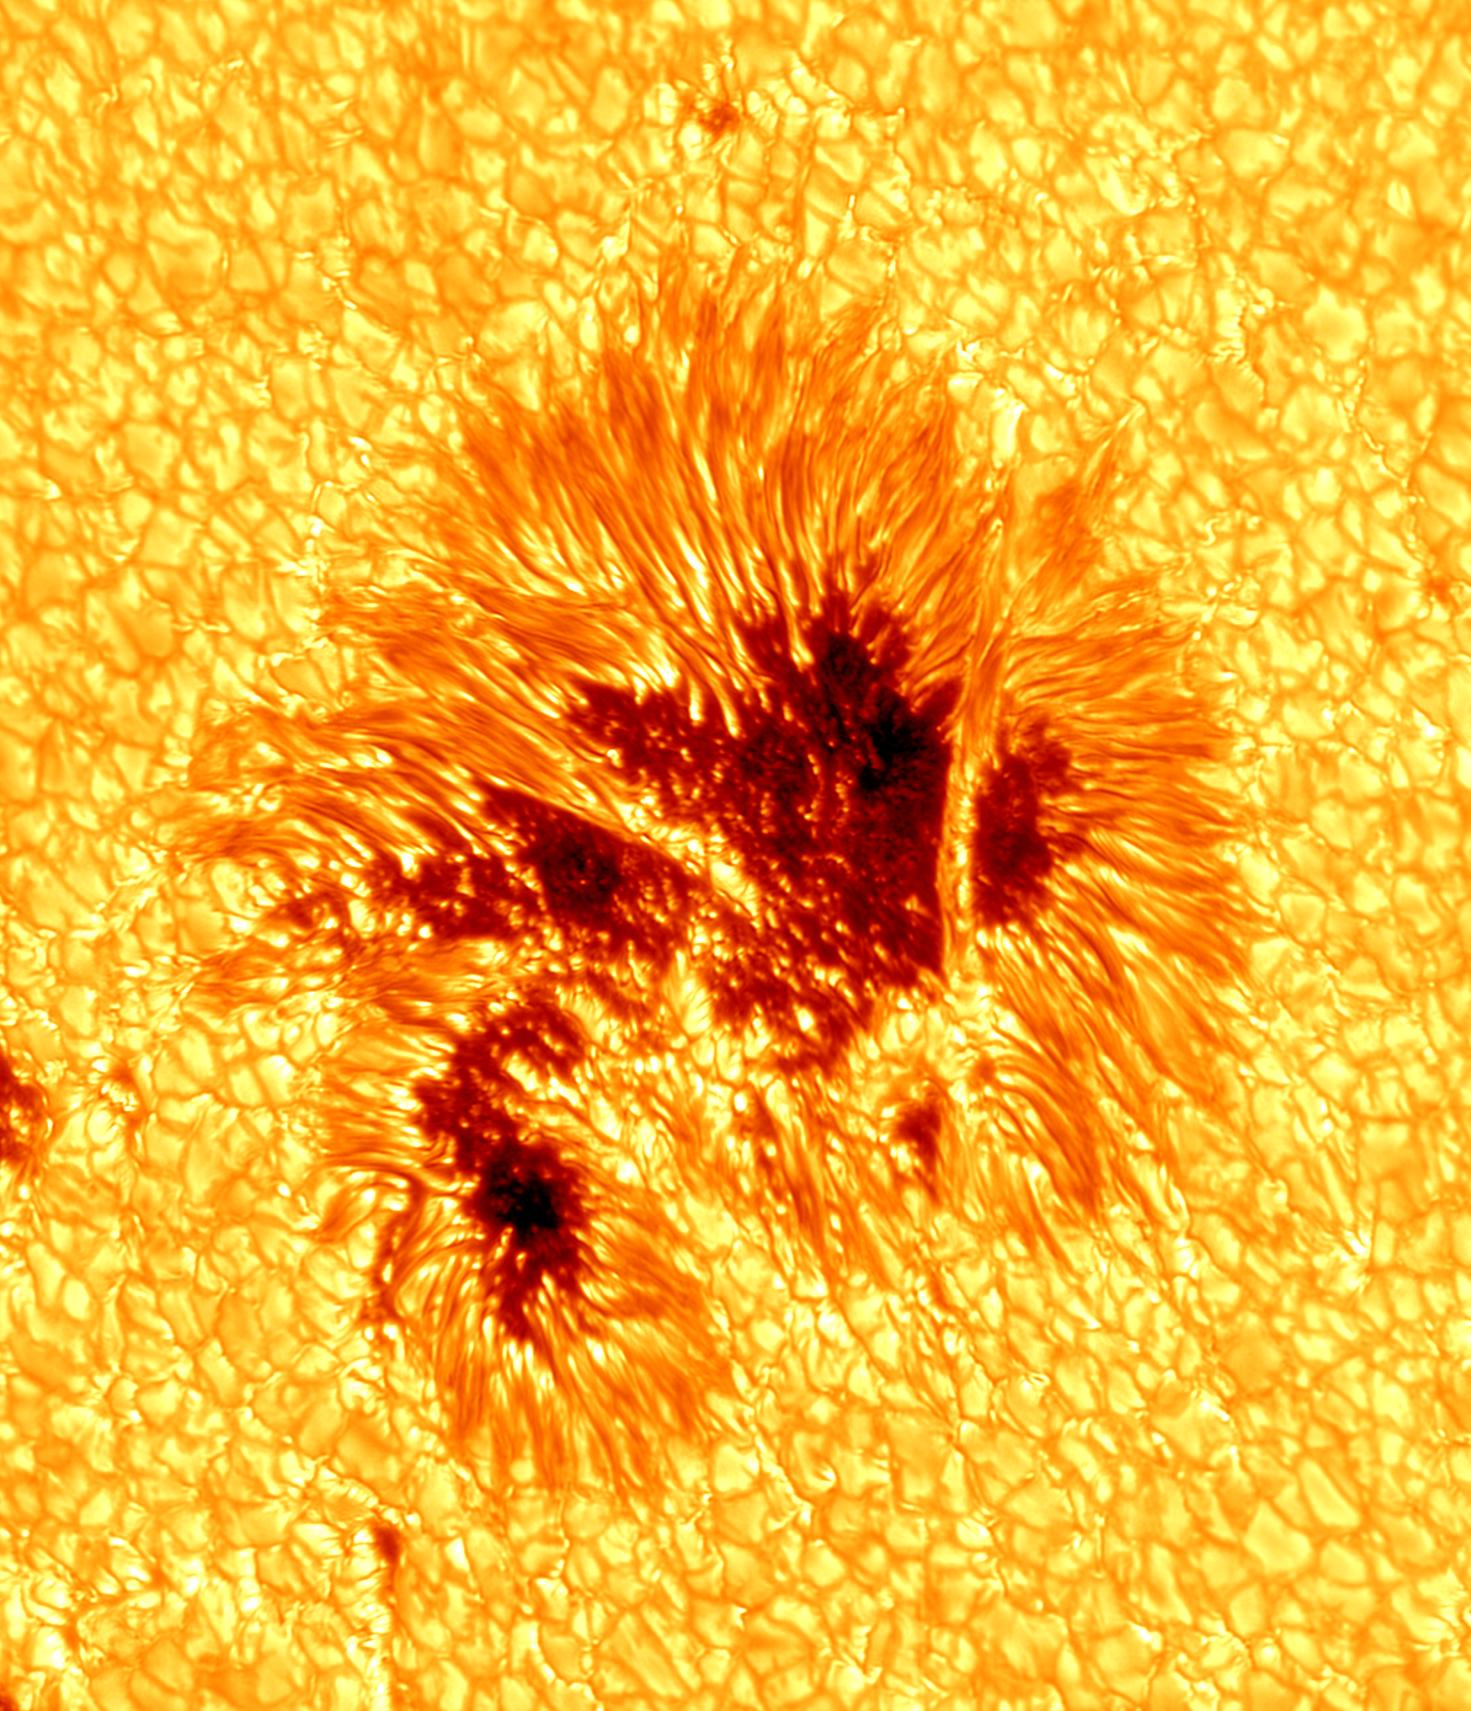 Clearest image of a sunspot ever